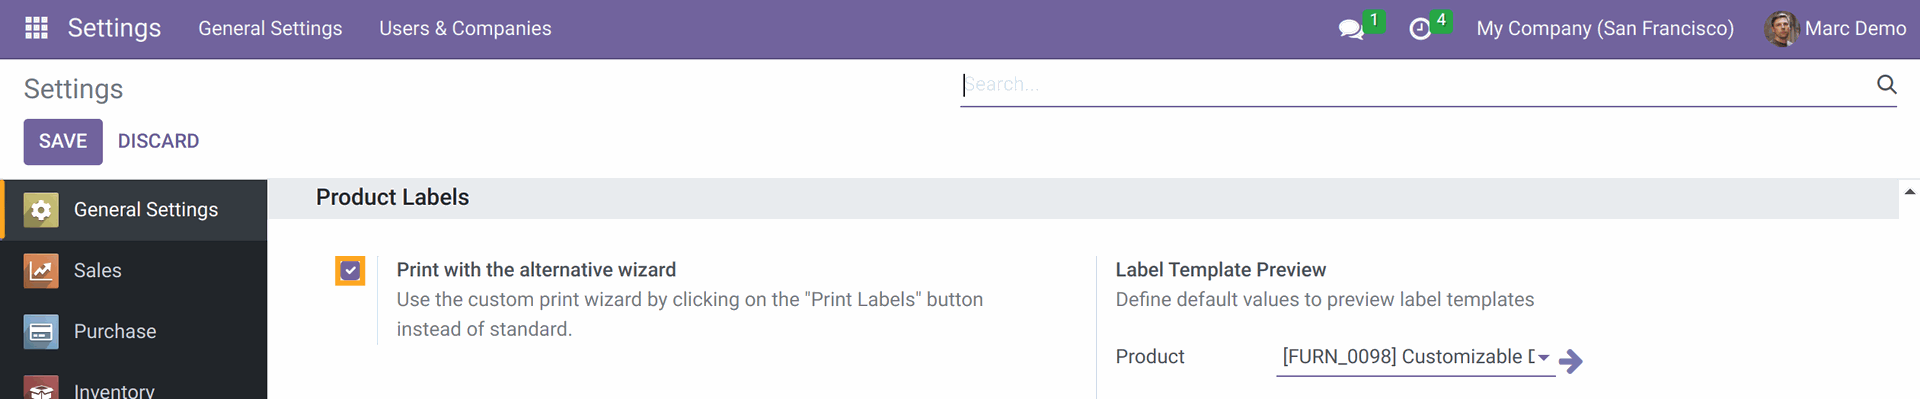 odoo product label replace standart printing wizard